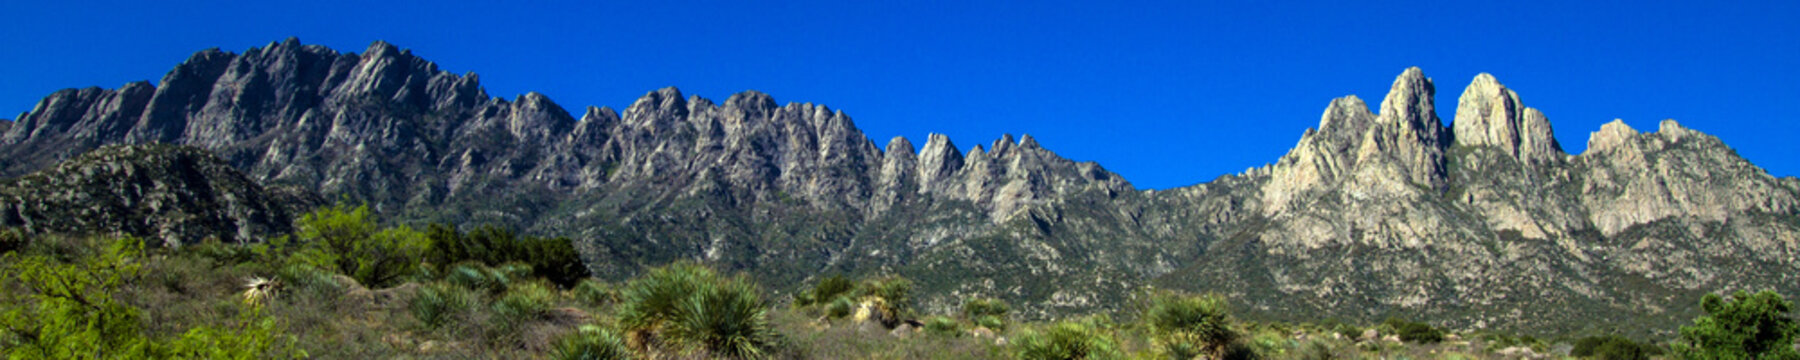 Ultra-wide panorama of Organ Mountains-Desert Peaks National Monument in New Mexico